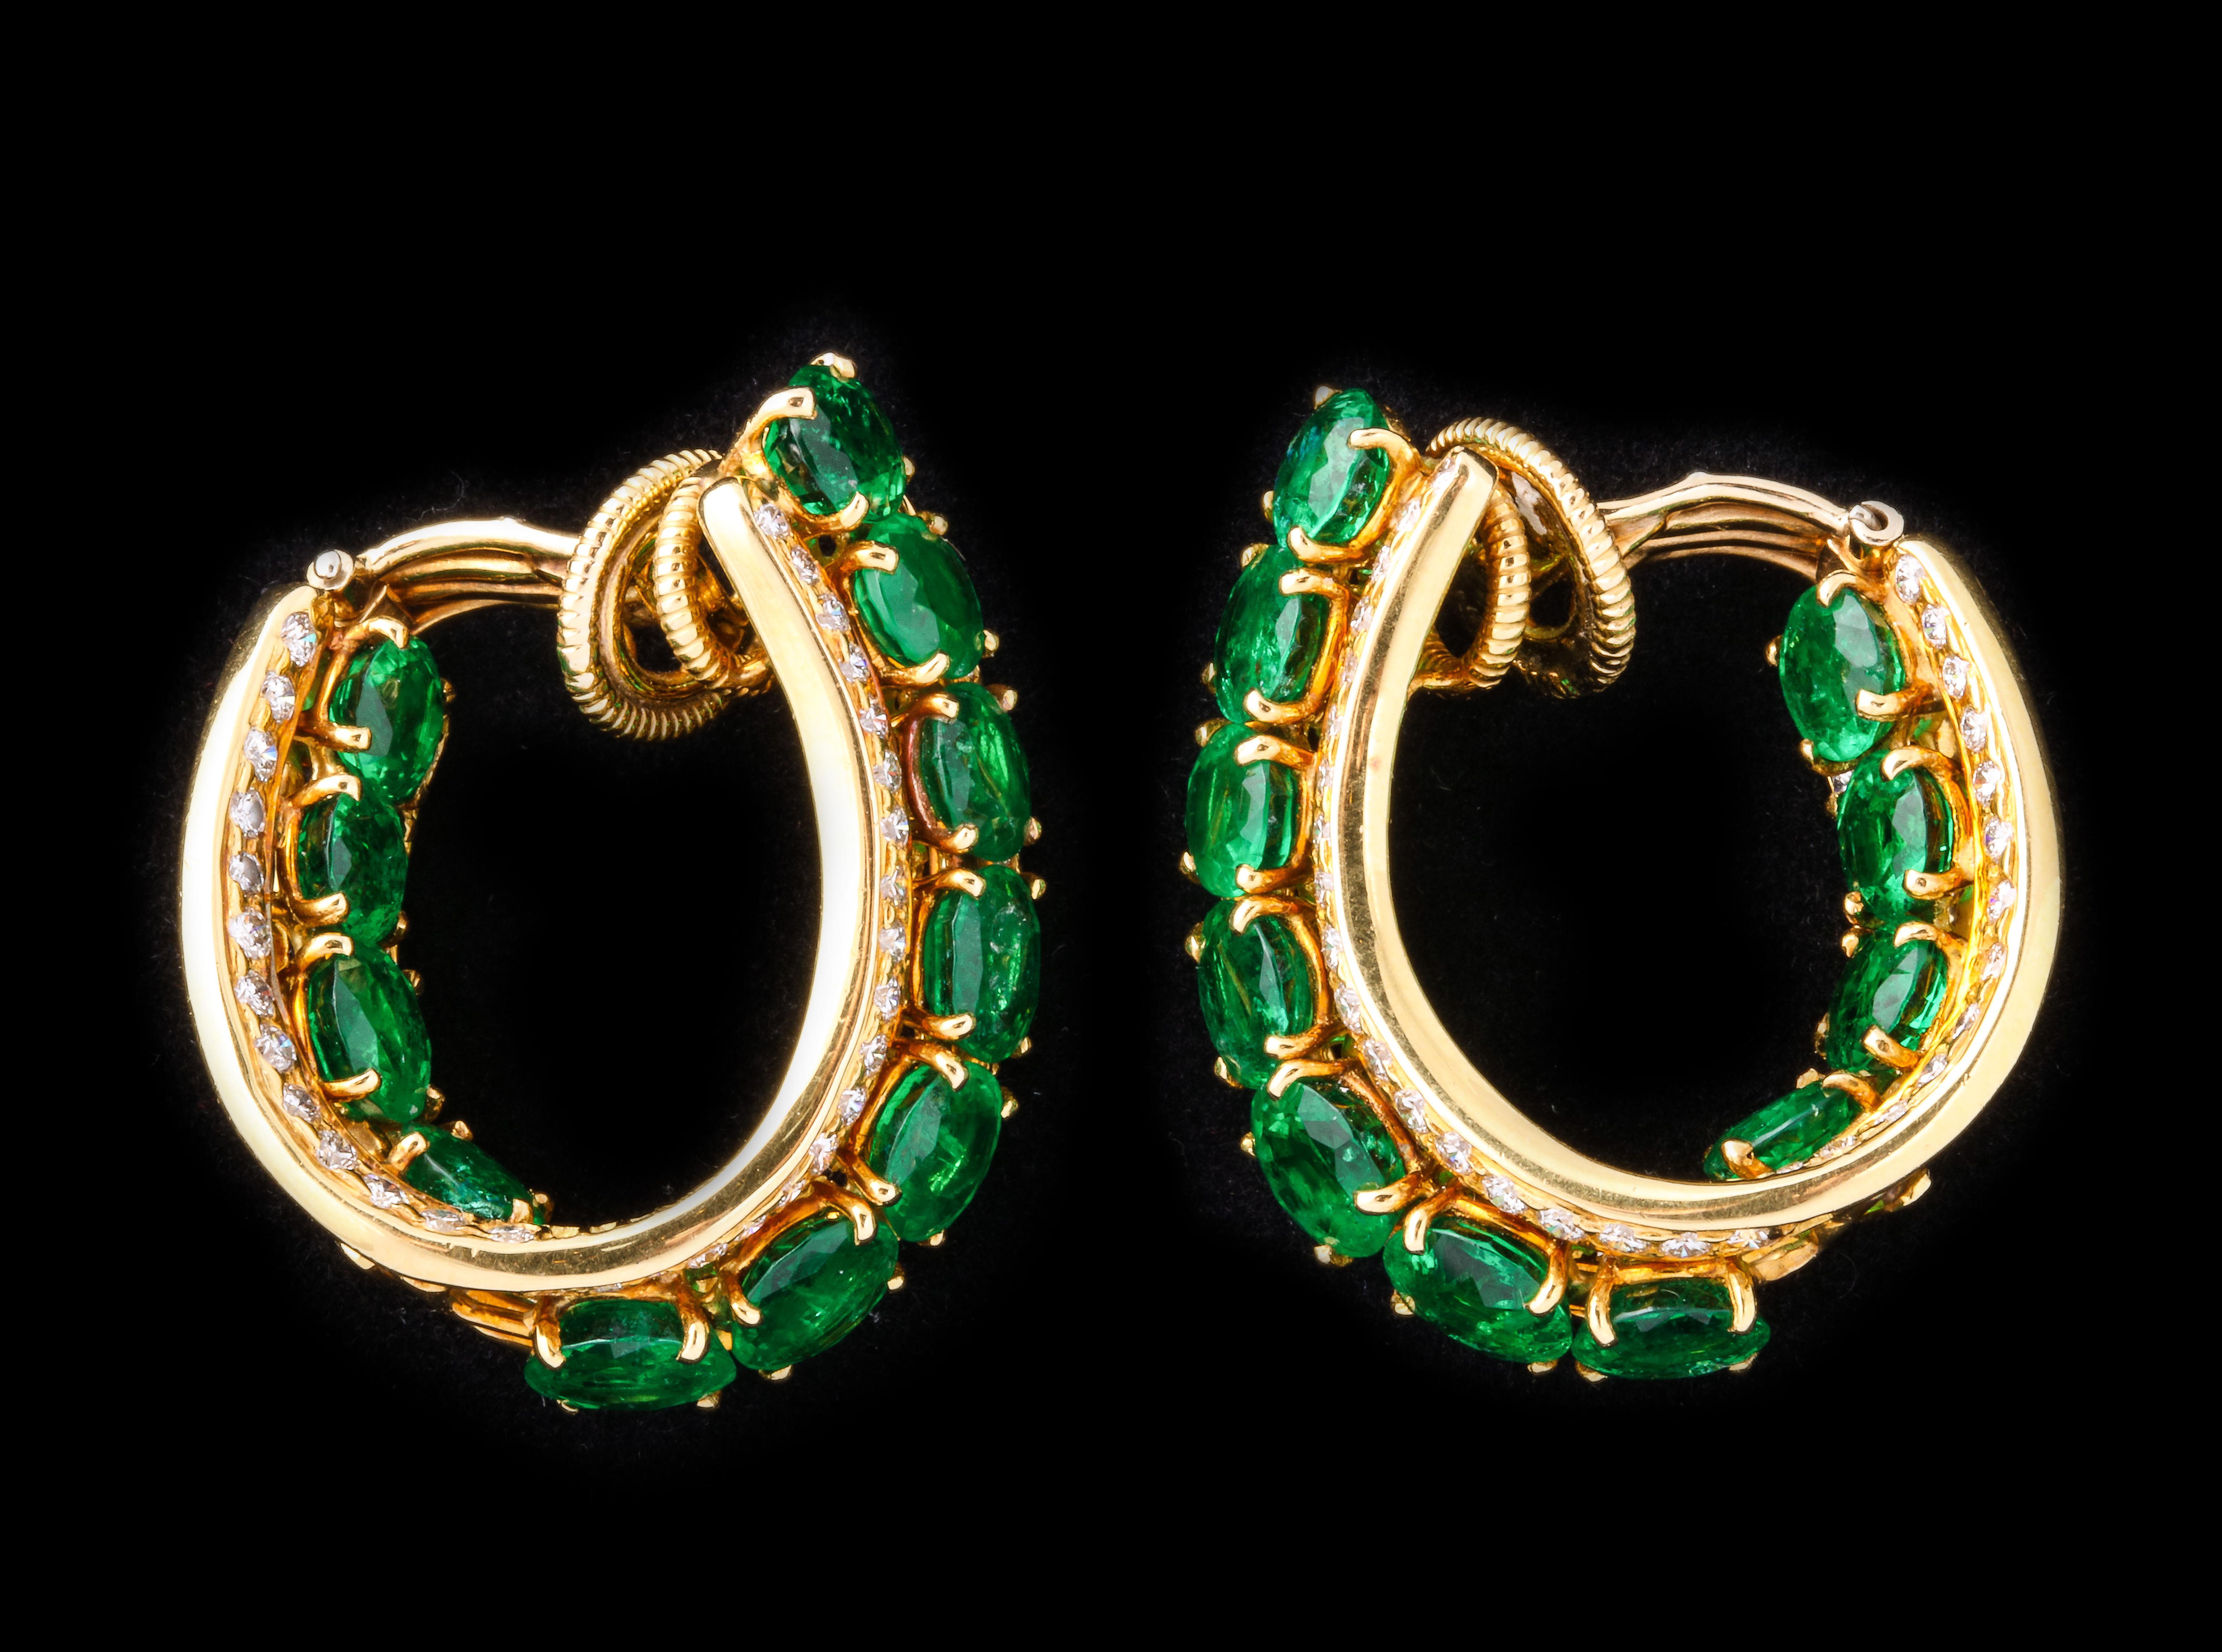 Harry Winston Emerald and Diamond Earrings

Emeralds weigh approximately 9 ct. 